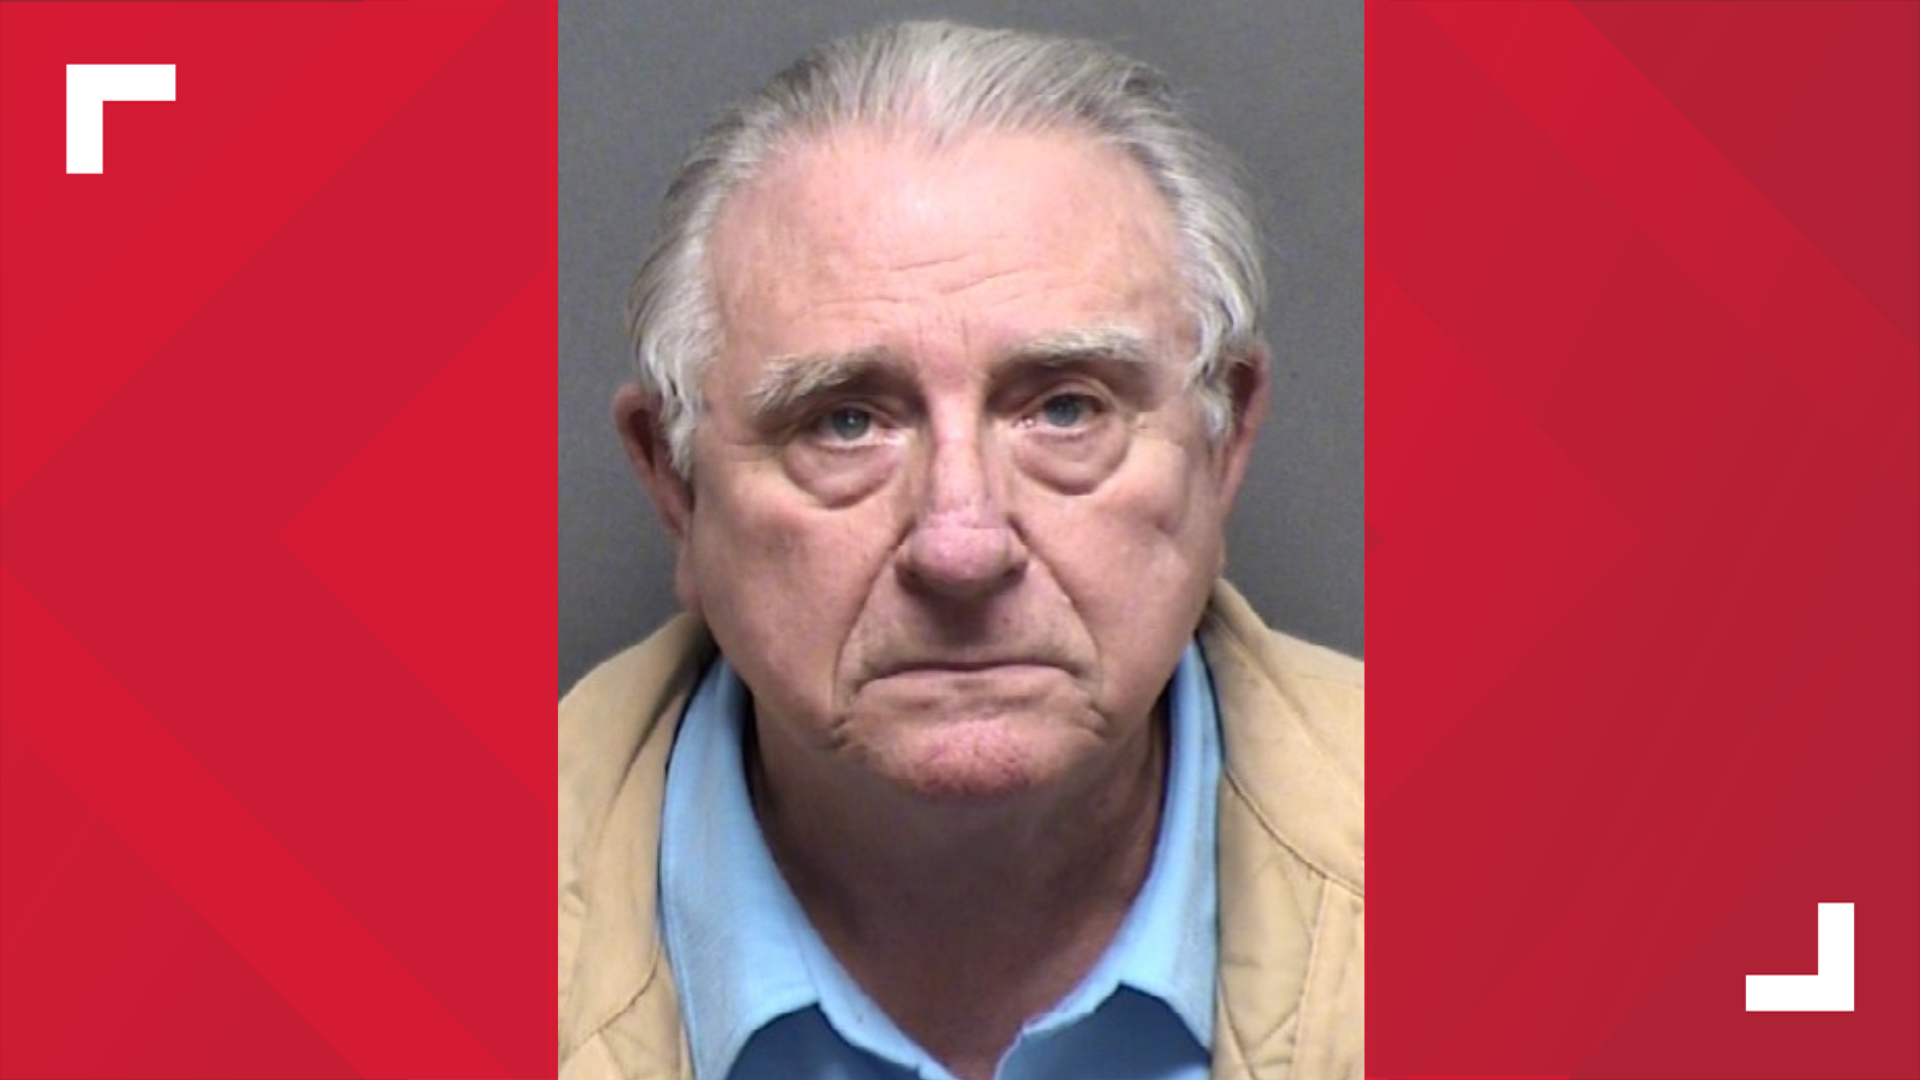 76-year-old man sentenced to 80 years in prison in connection to state,  federal child sex charges | kens5.com